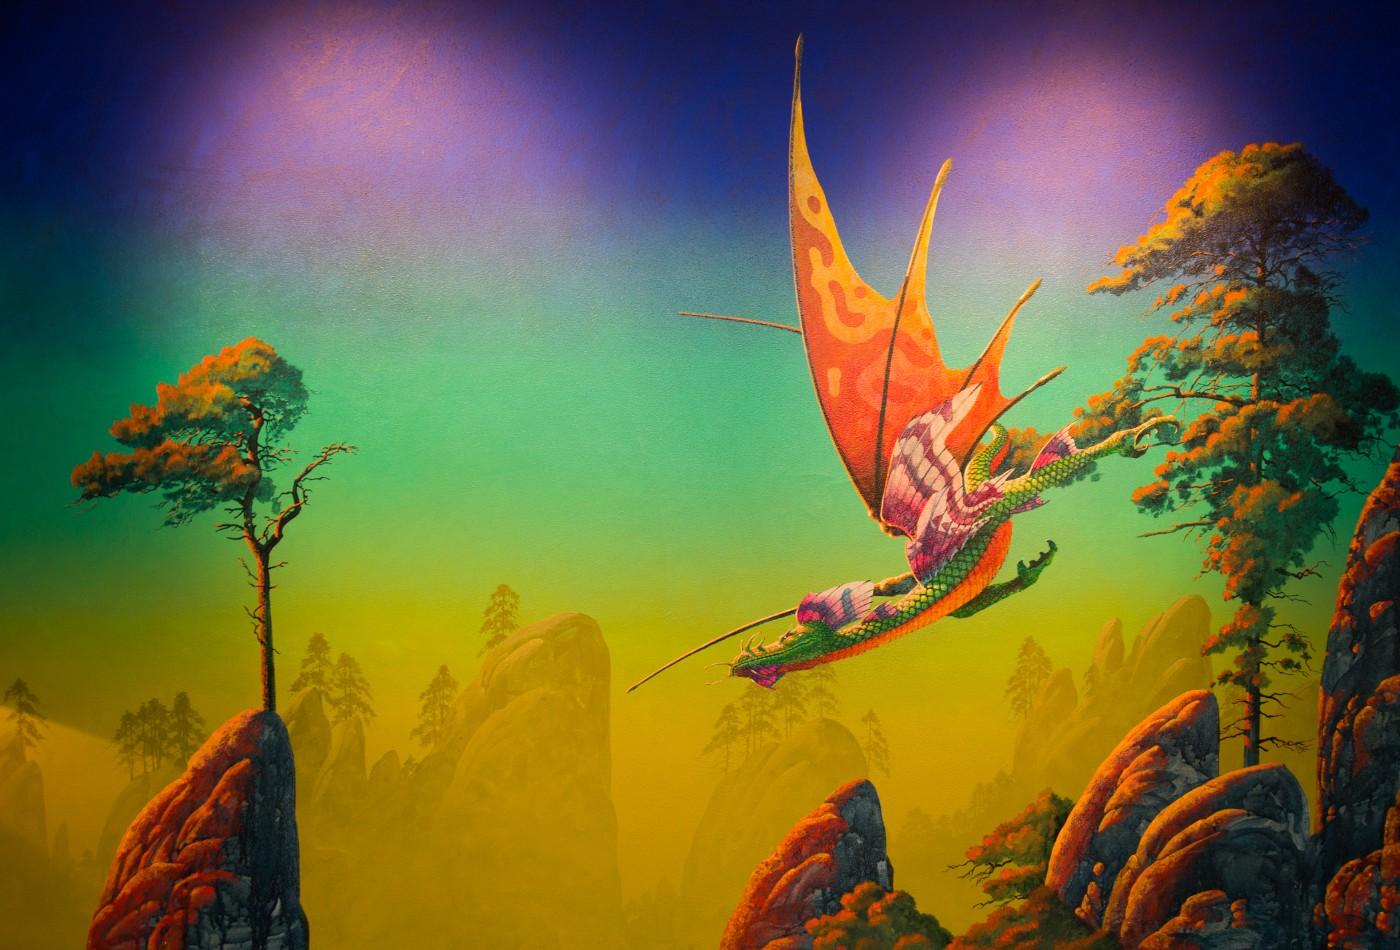 roger dean yes cosmic view 1973 posters